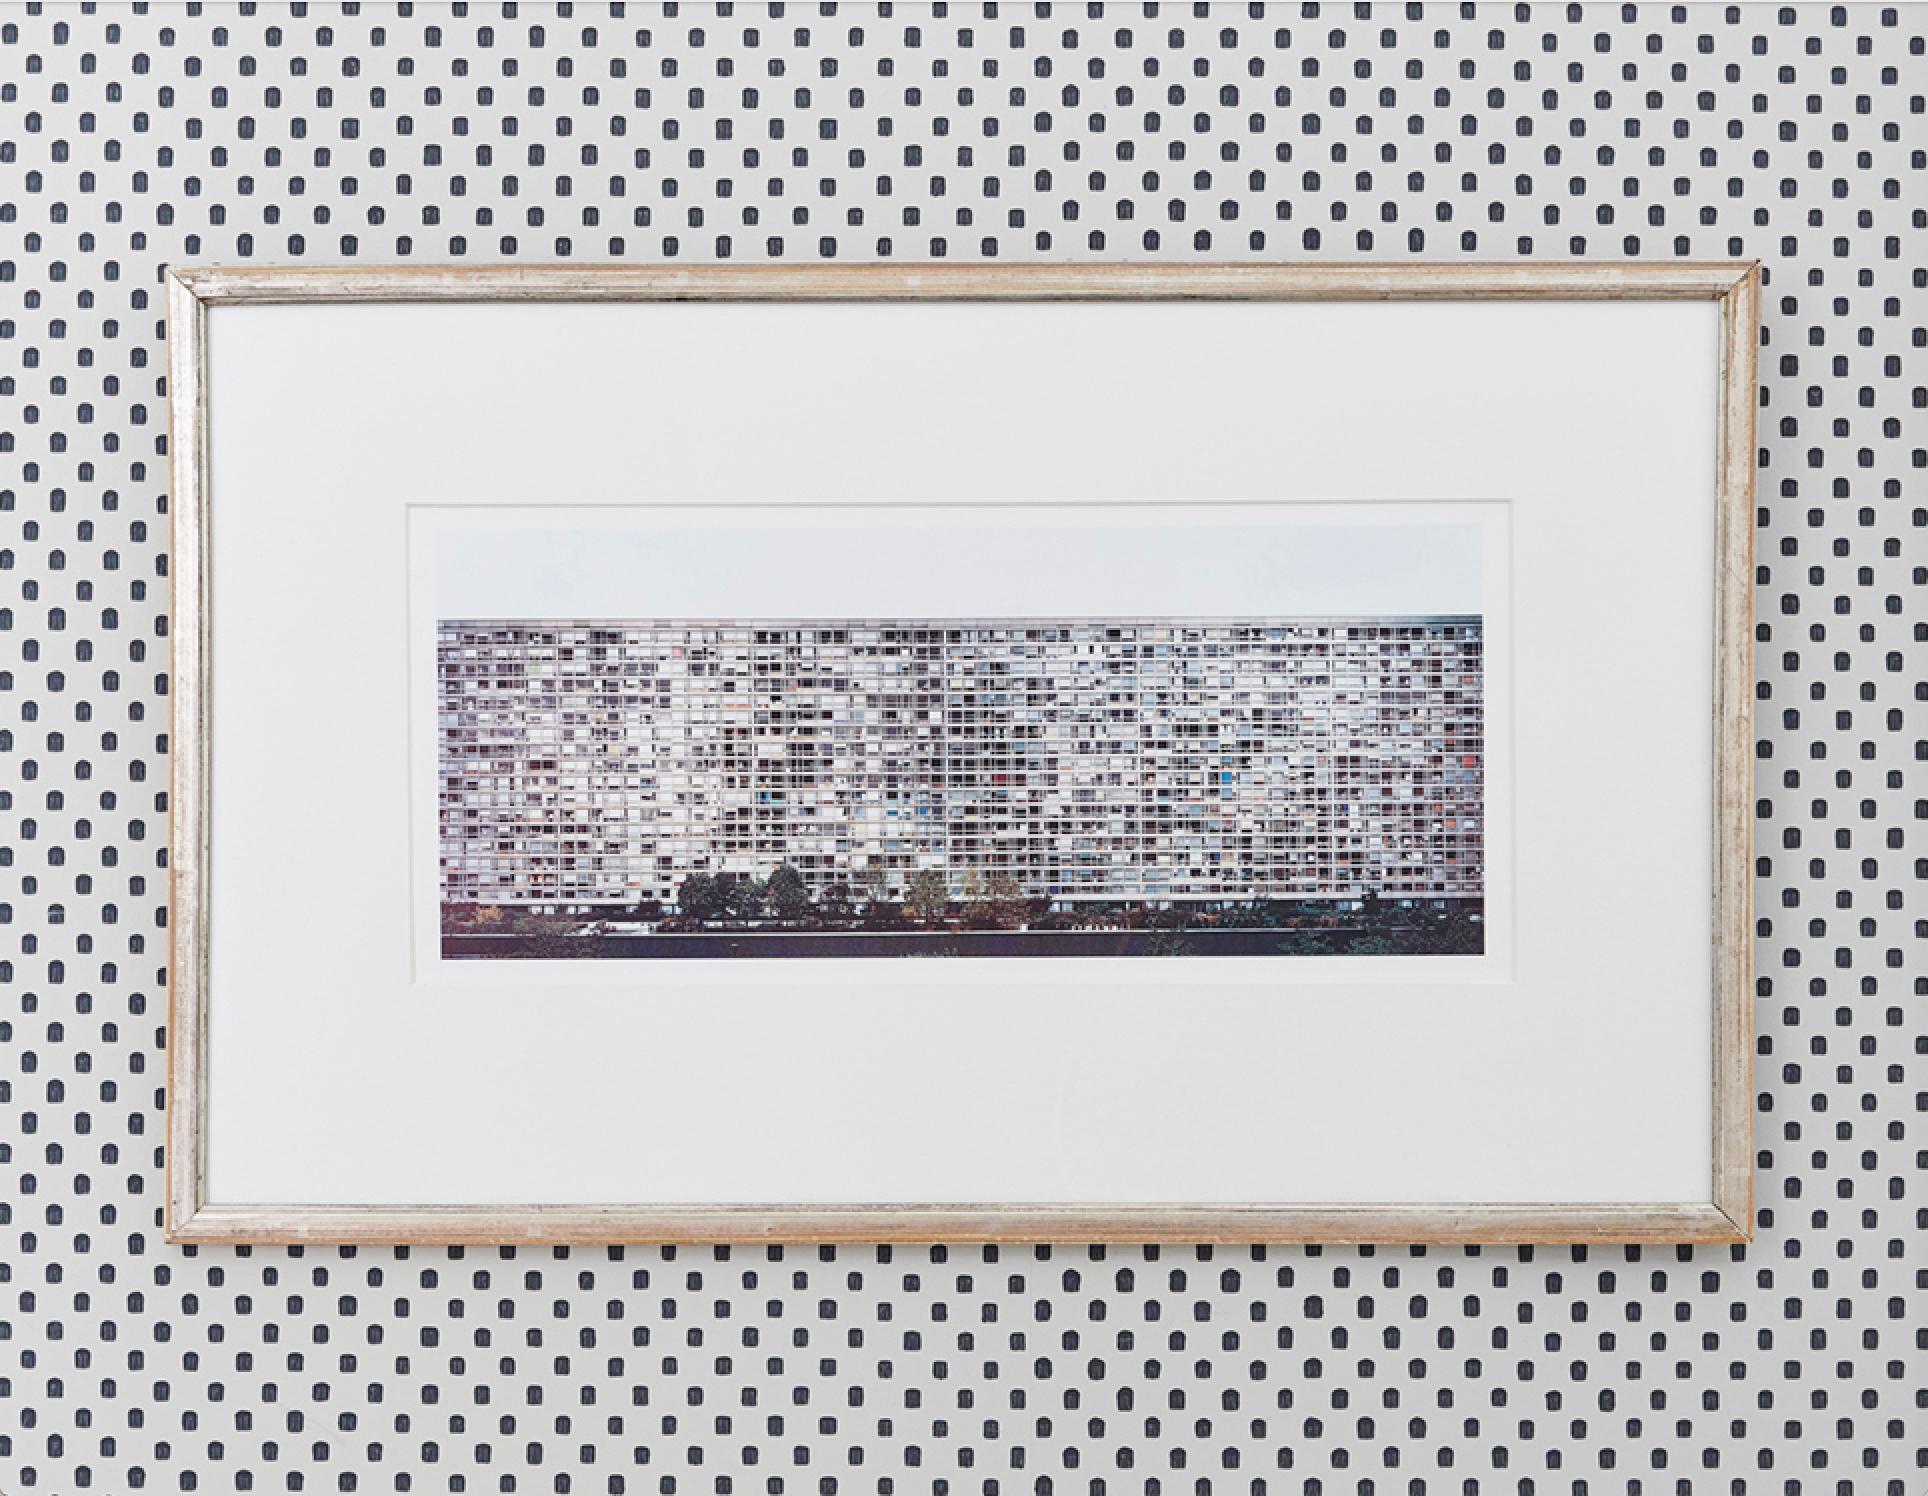 Andreas Gursky
Germany, 1995

“Montparnasse”. Colour offset lithograph.  Signed. From an edition of 30.

H 39 x W 62 x D 3 cm